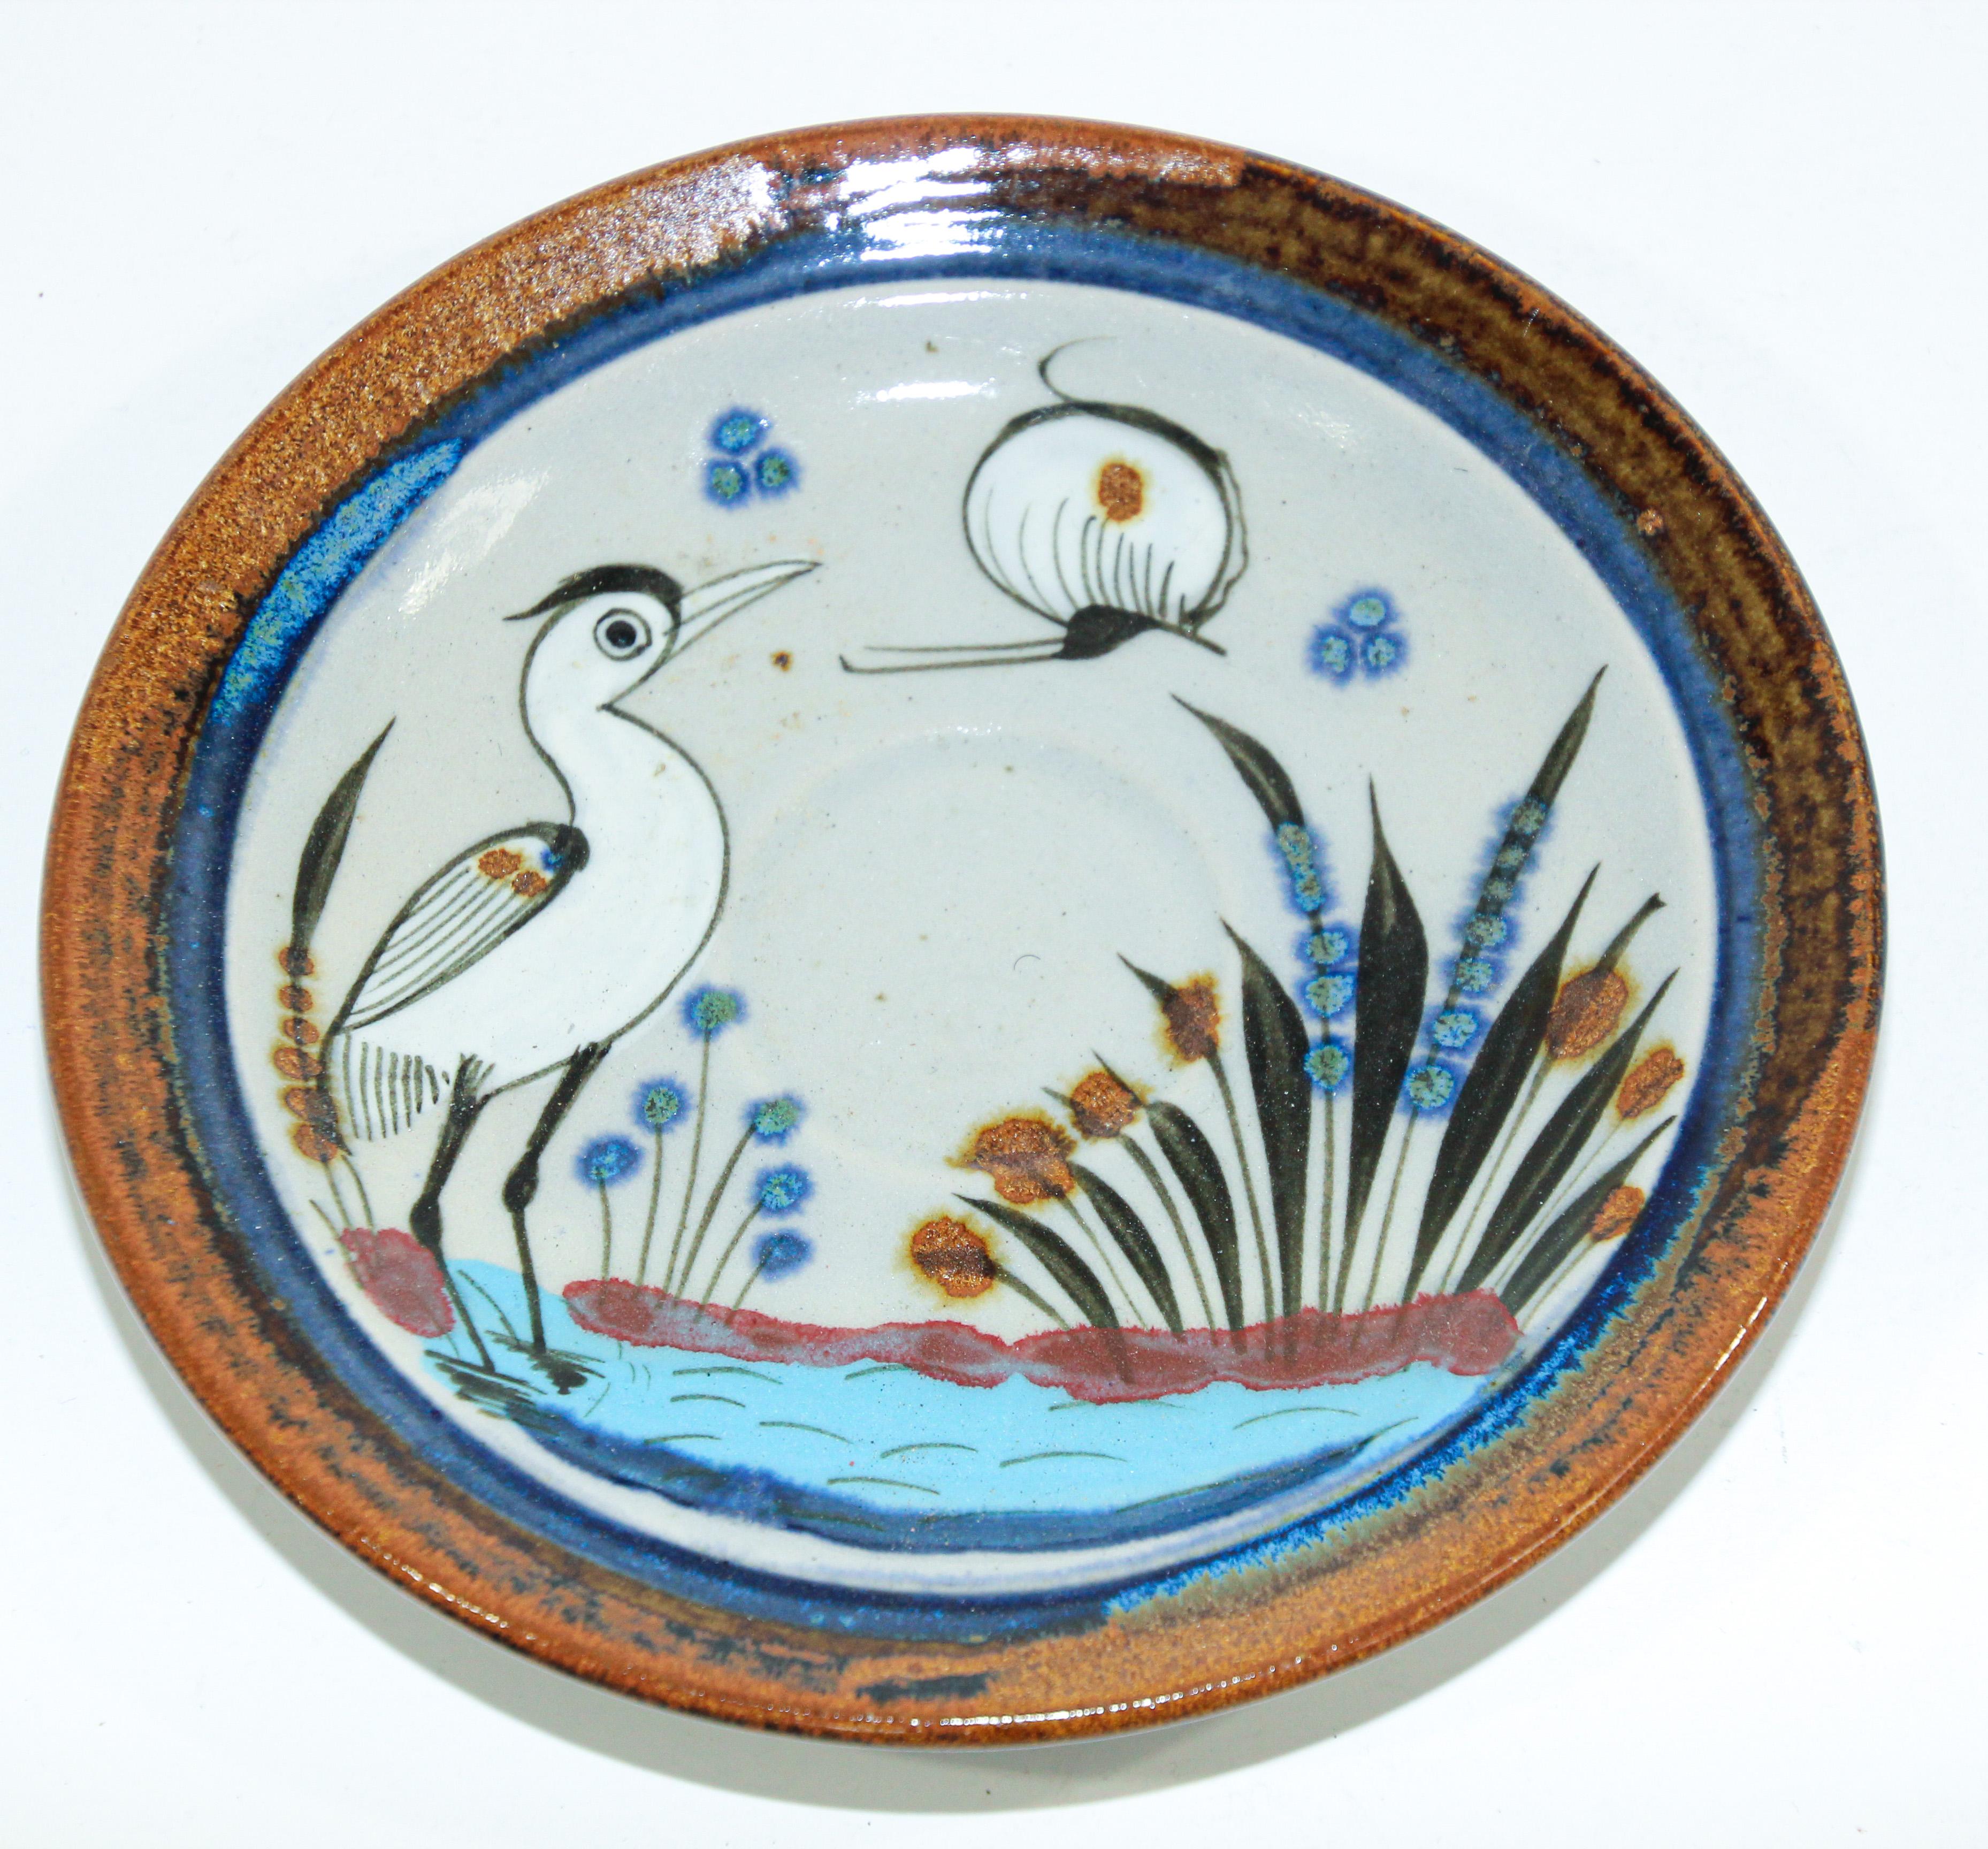 Vintage Ken Edwards Mexican ceramic bird trivet from Tonala Pottery.
Beautiful vintage Mexican hand made and hand painted TONALA Art Pottery.
Decorative small decorative plate by Ken Edwards' El Palomar studio with signature. 
Collectible Folk